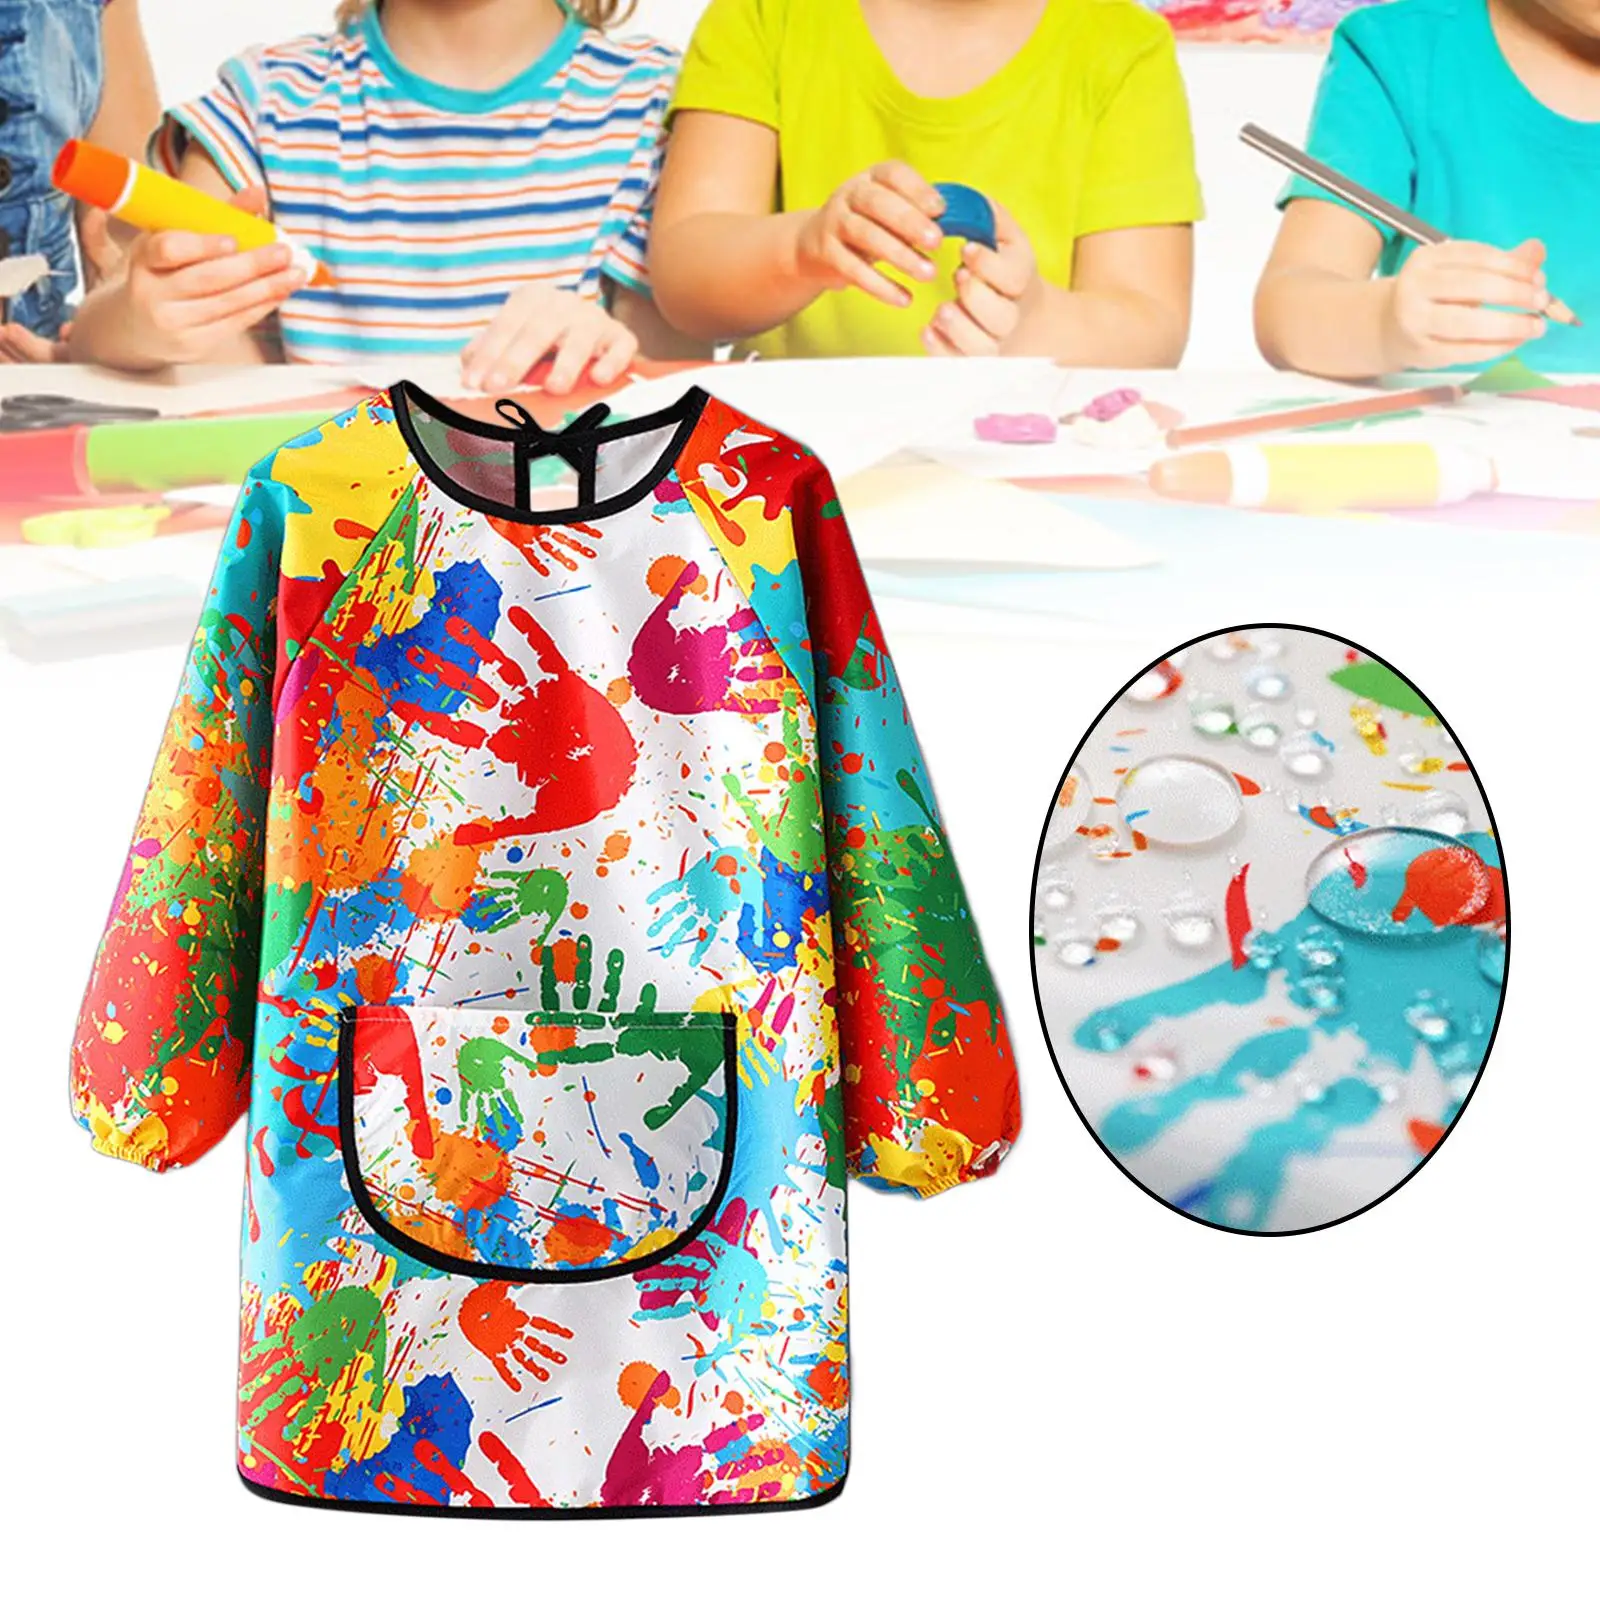 Kids Art Smock Painting Apron Portable Art Class for Cooking Drawing Baby